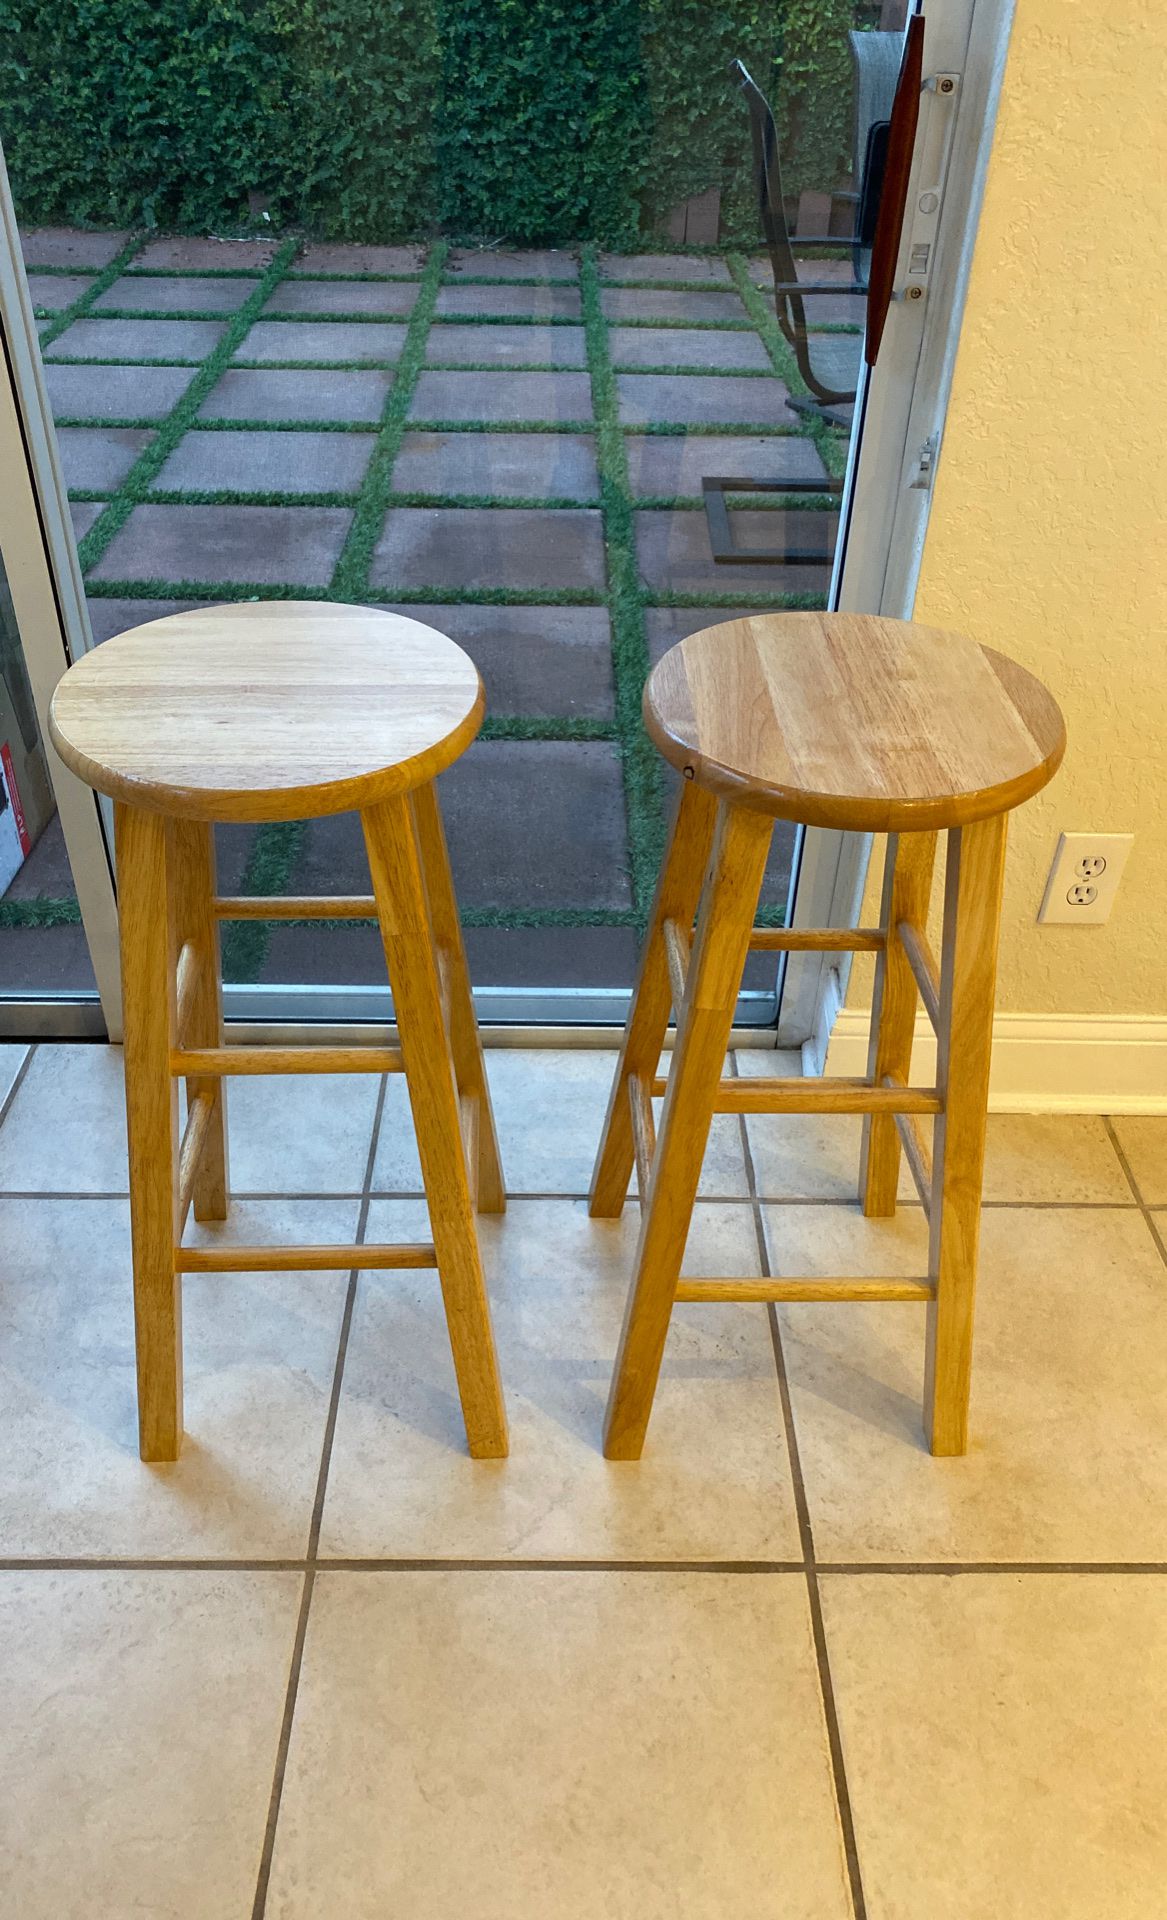 Pair of solid wood stools